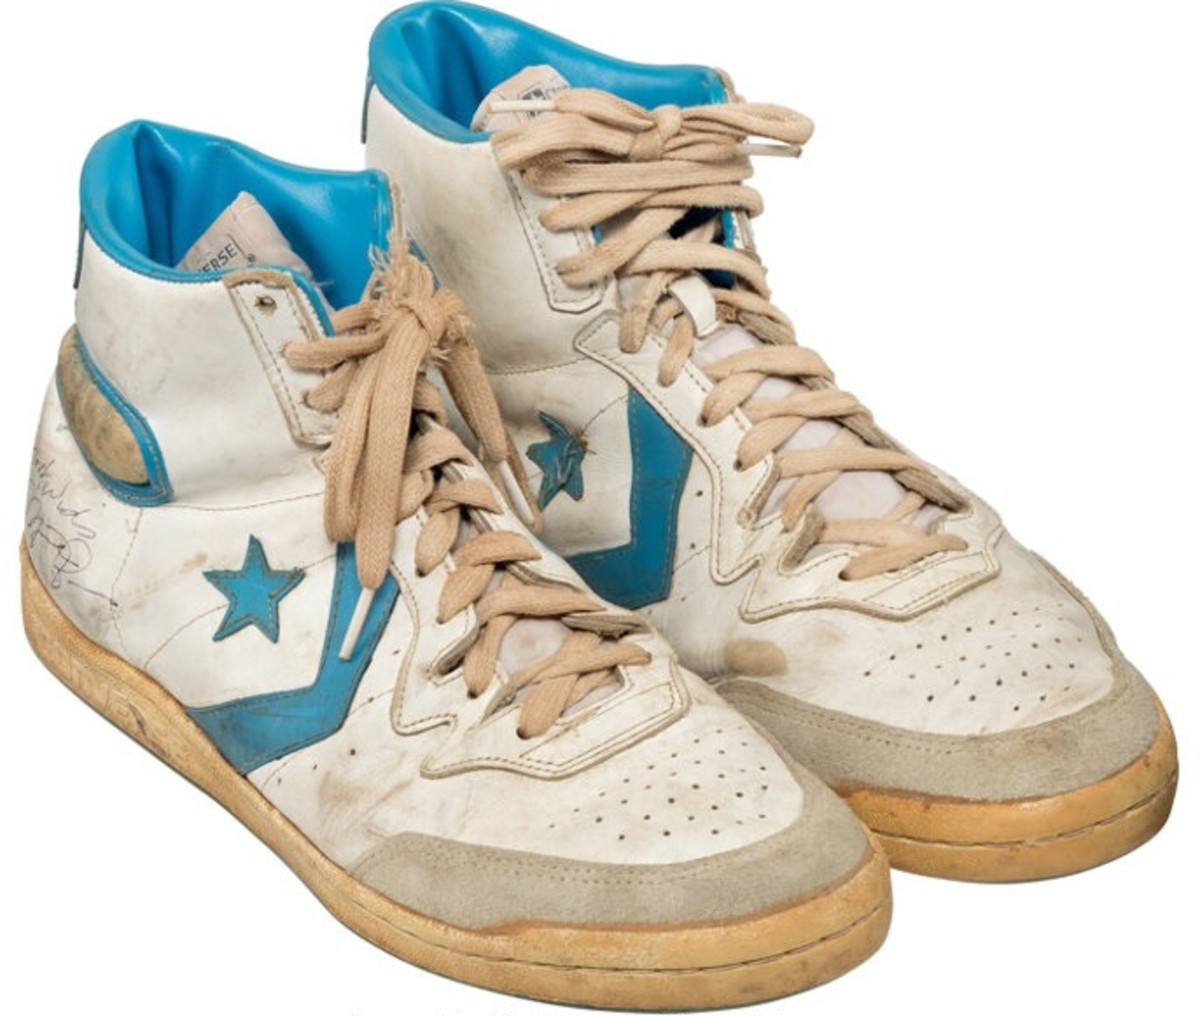 Michael Jordan's Olympic Trials Converse Could Fetch Up to